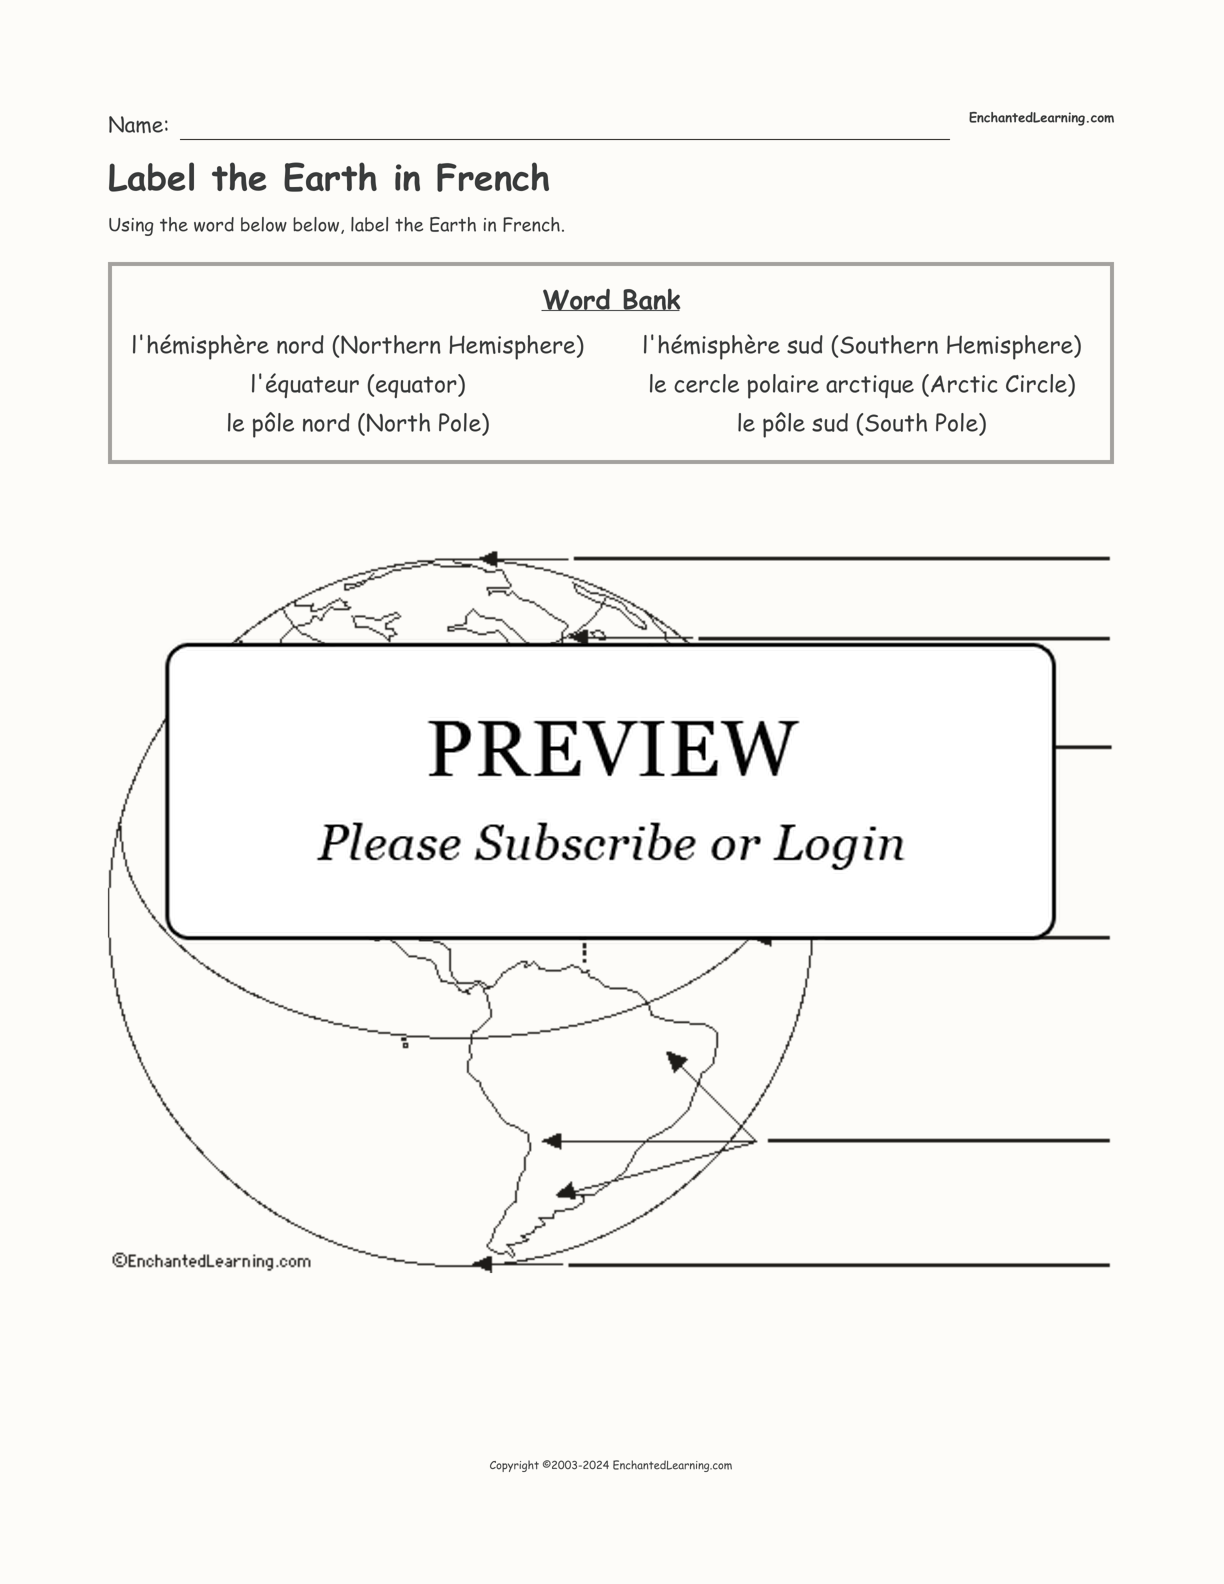 Label the Earth in French interactive worksheet page 1